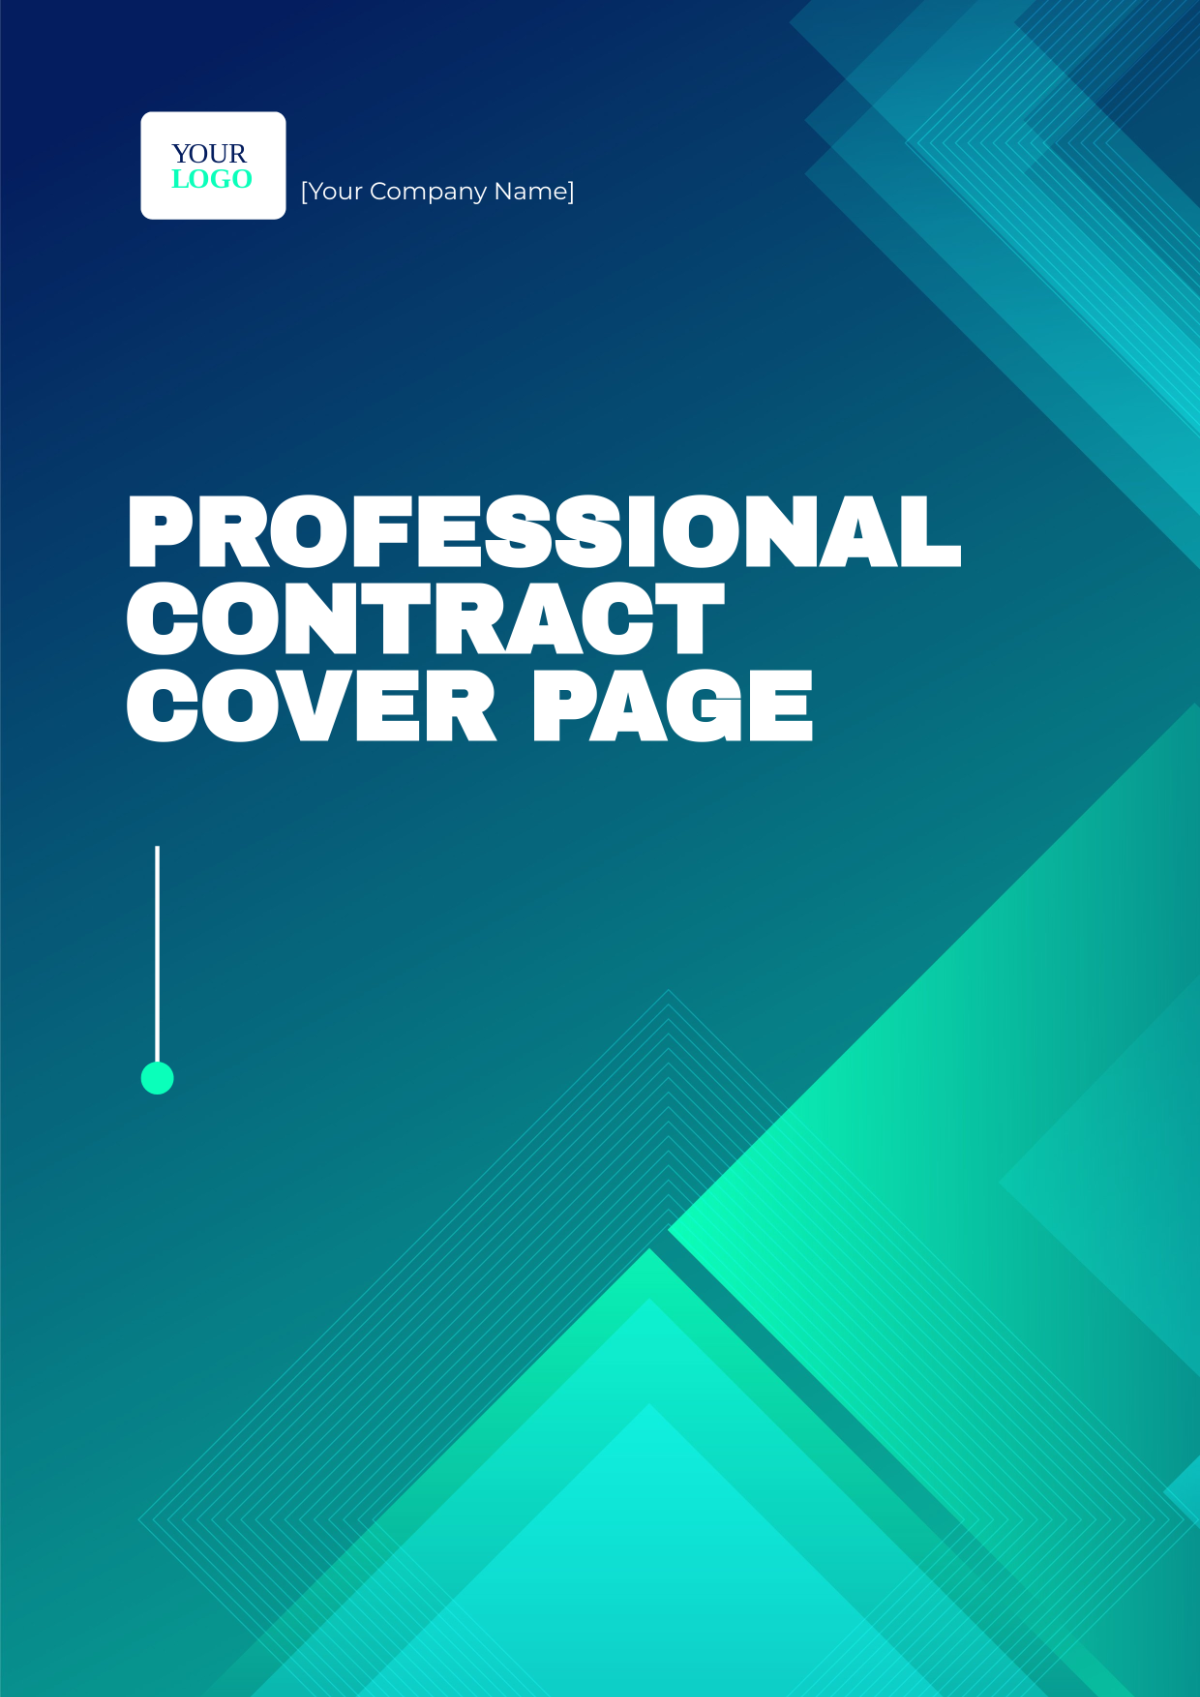 Professional Contract Cover Page Template